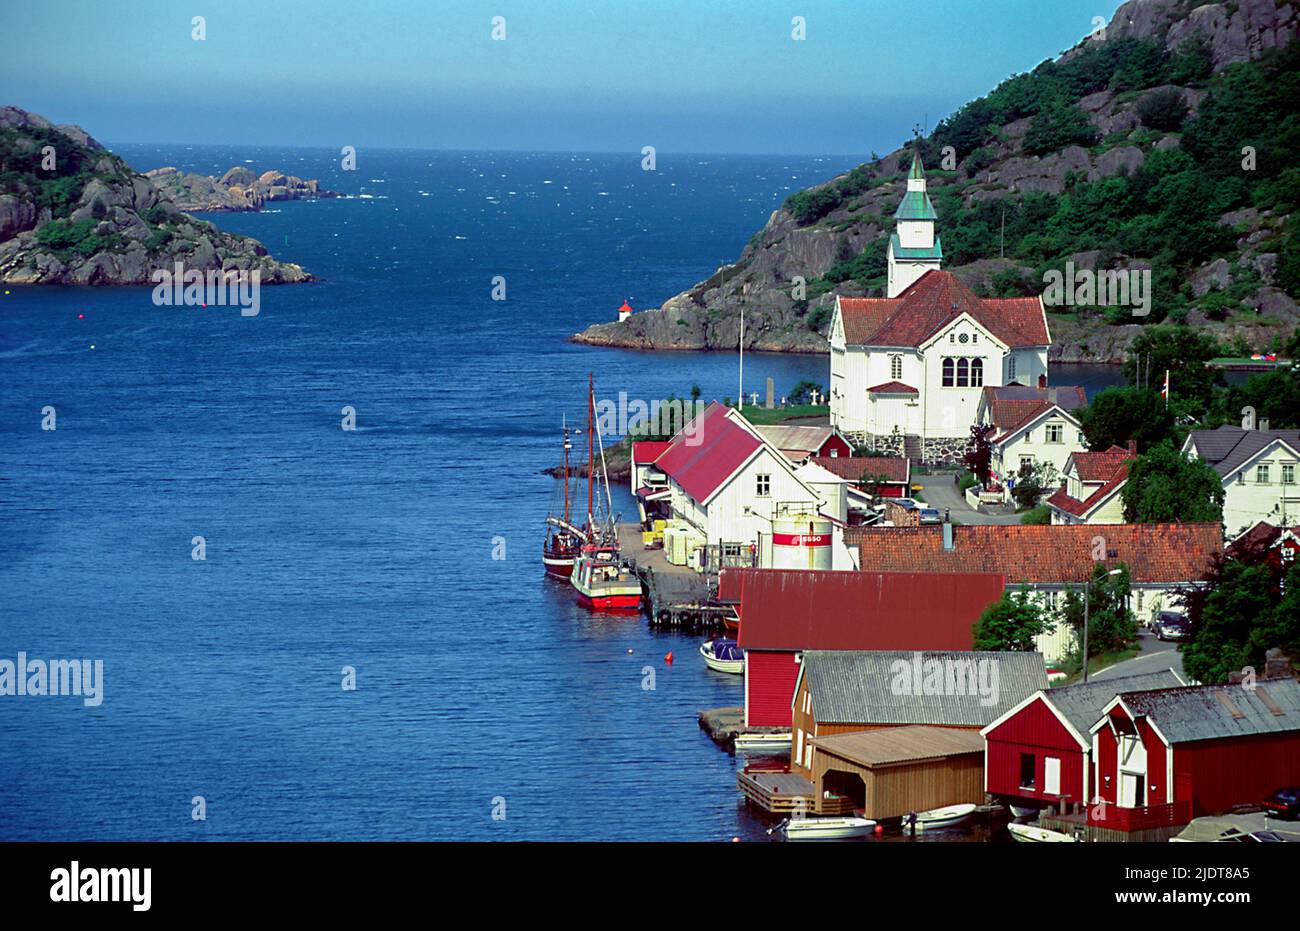 The village of Kirkehamn (Church Harbor) on the island of Hidra in south-western Norway.  The church has named the village and dates back to 1854 alth Stock Photo